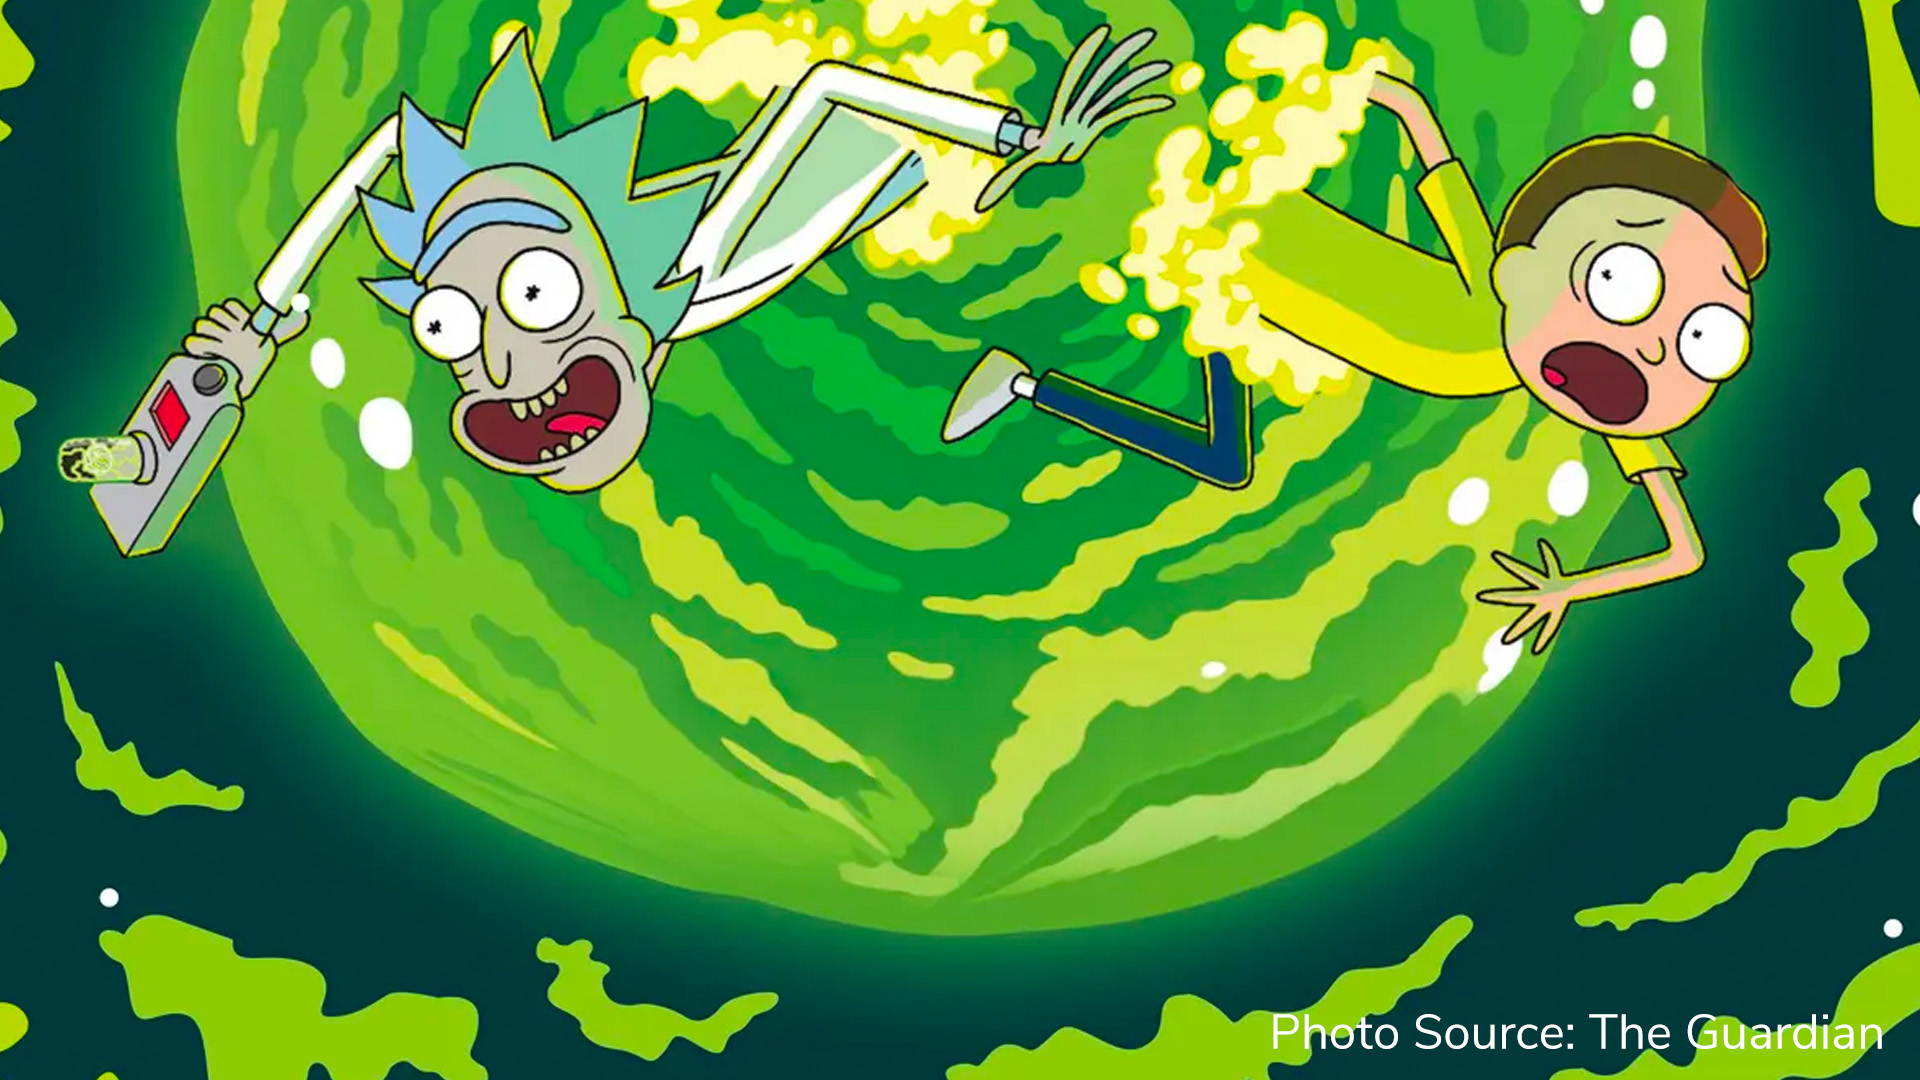 Rick and Morty Season 5 releasing on June 20th